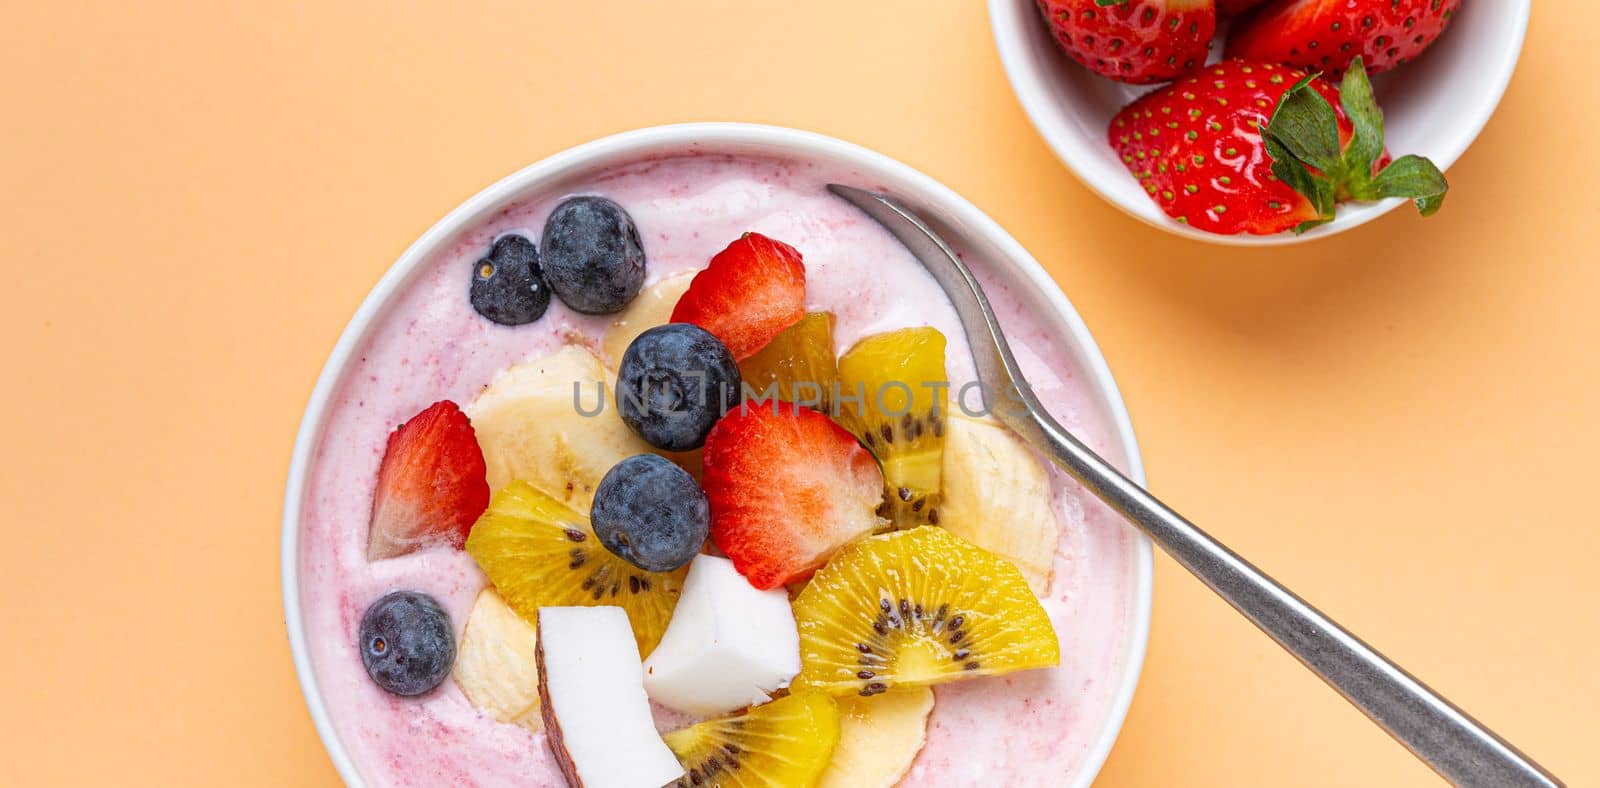 Healthy breakfast or dessert yogurt bowl with fresh banana, strawberry, blueberry, cocos, kiwi top view on minimal pastel paper background and spoon by its_al_dente